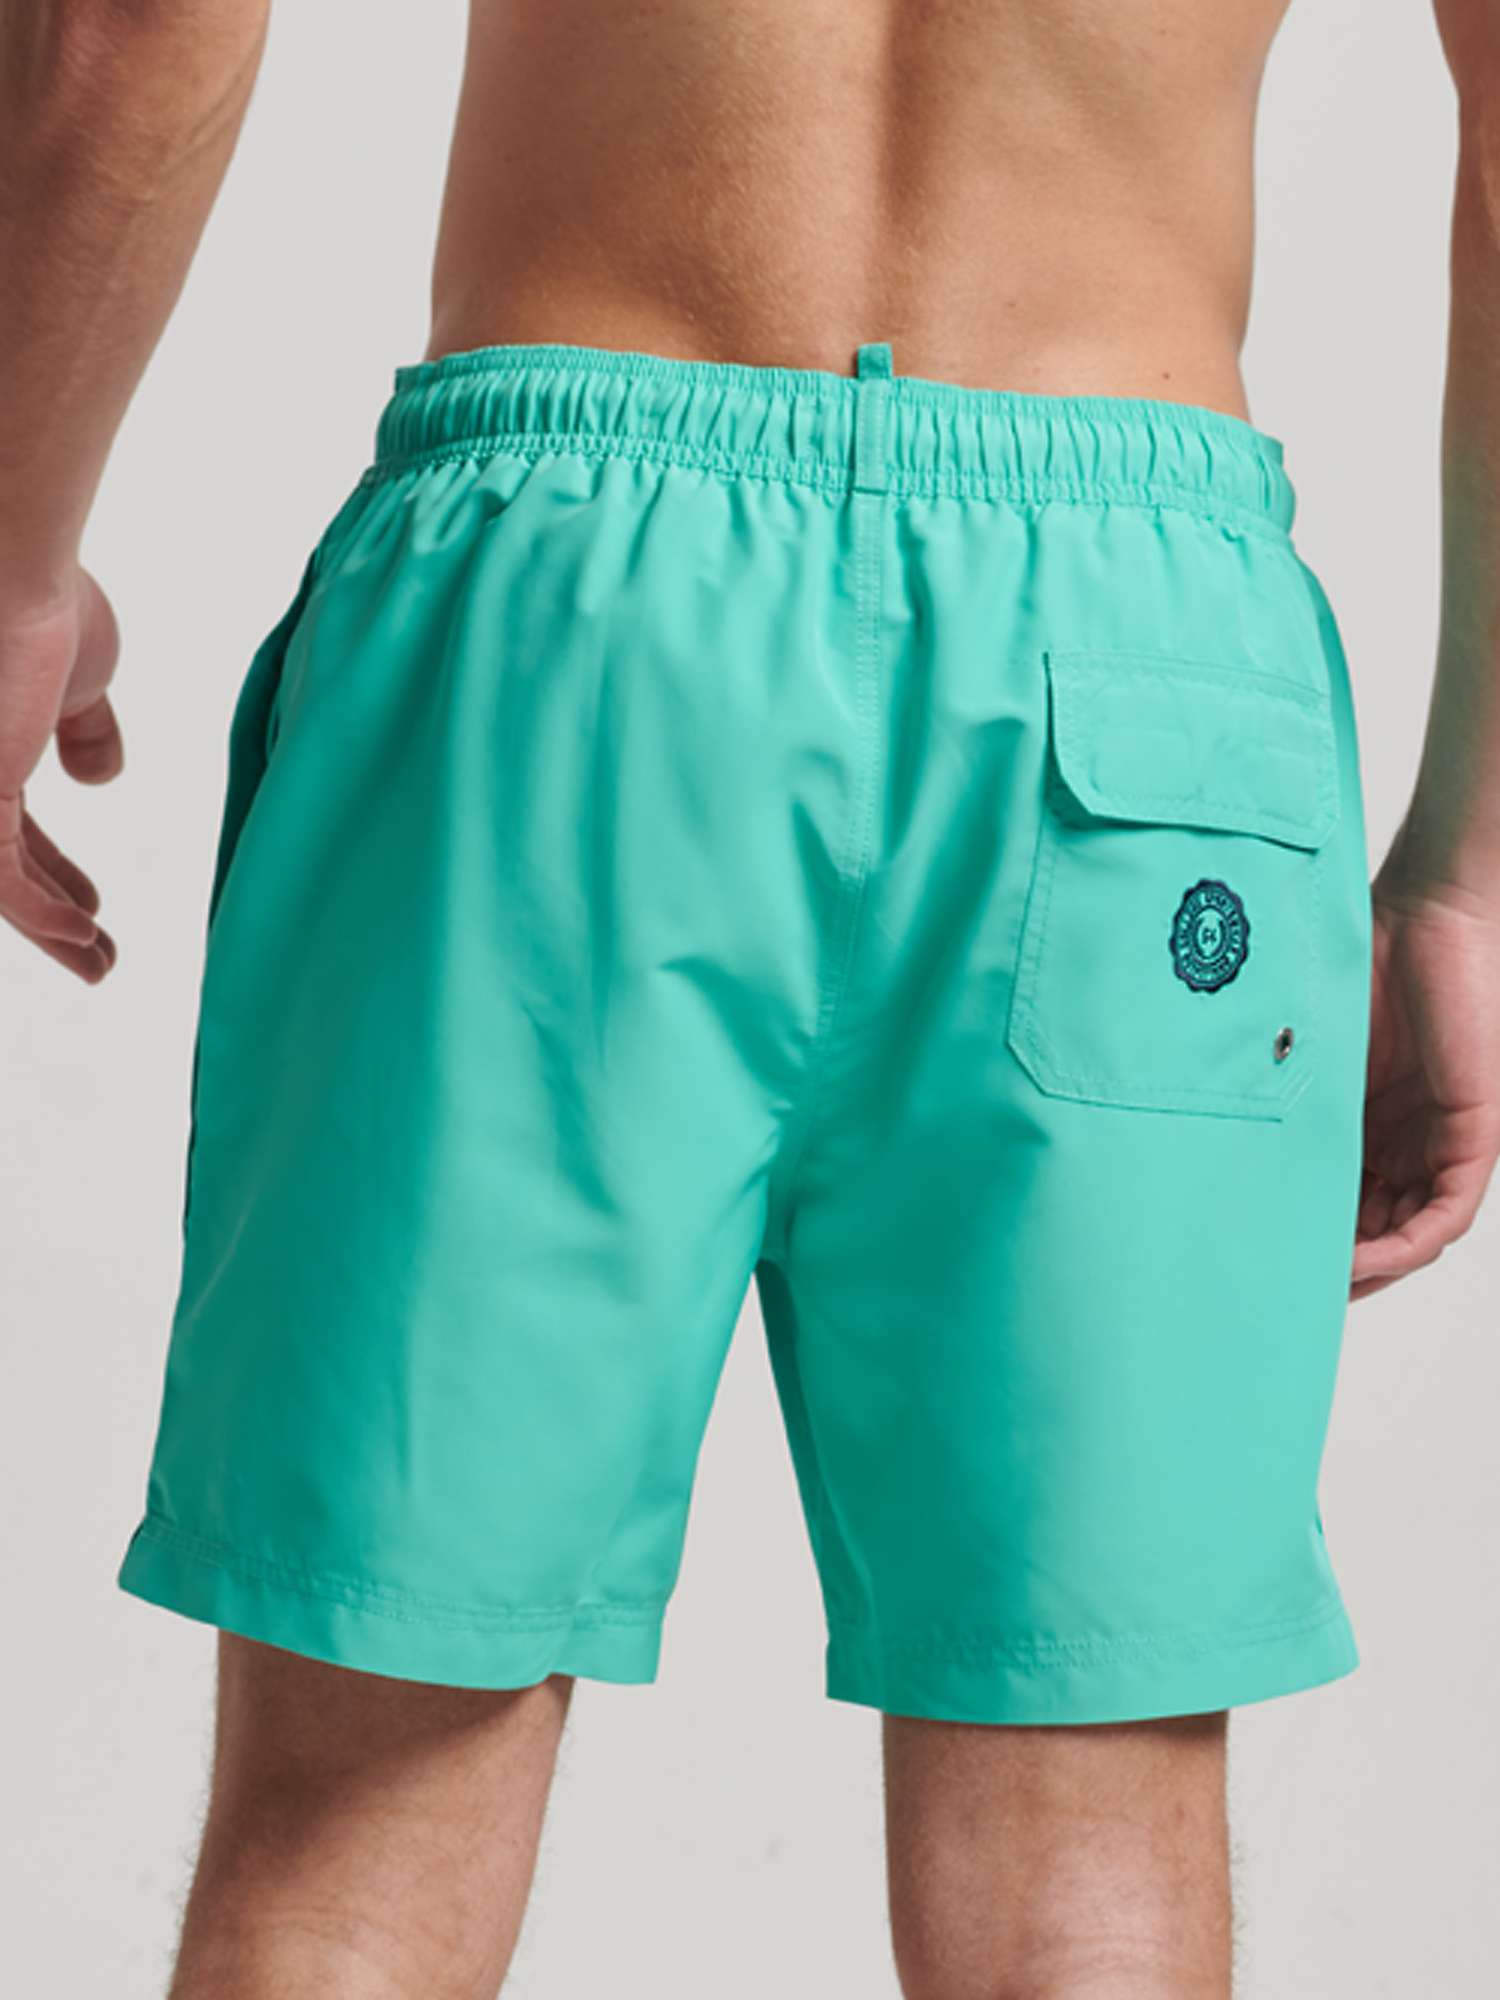 Buy Superdry Polo Swim Shorts Online at johnlewis.com